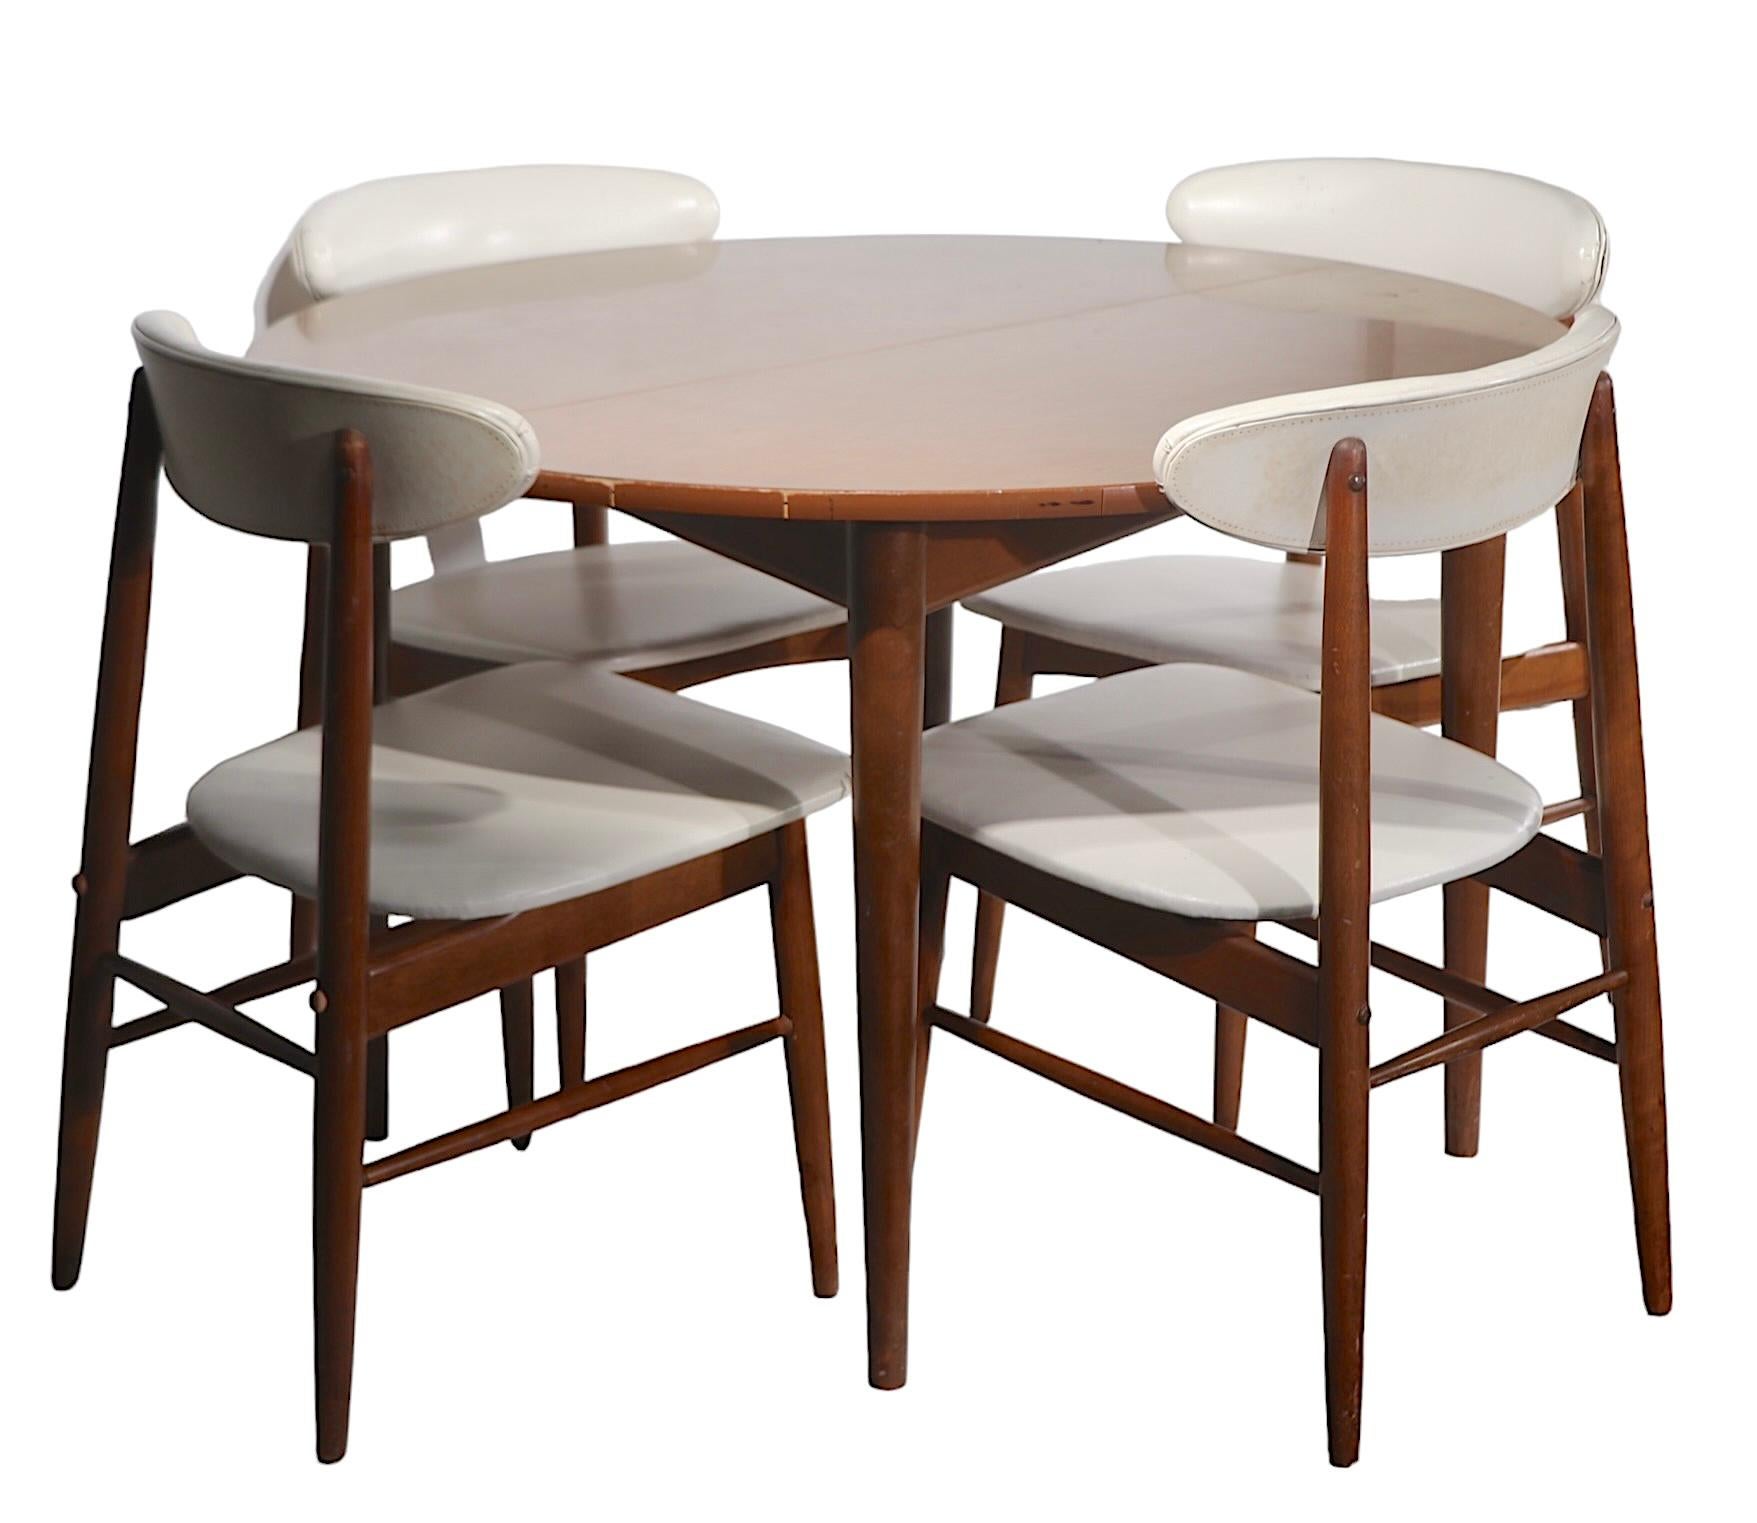 American 5 pc Mid Century Dinette Set by Viko Baumritter c 1950’s For Sale